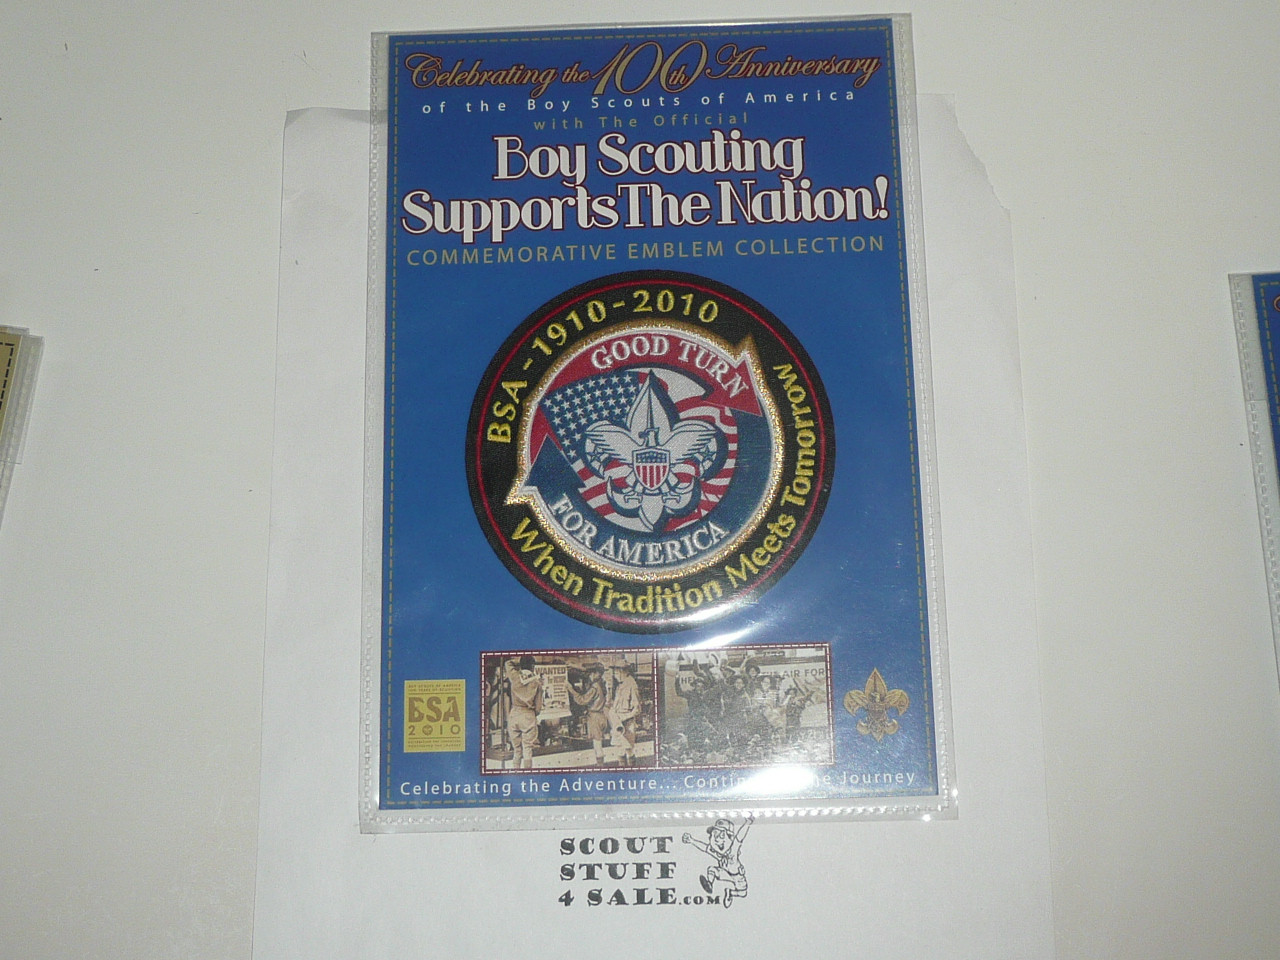 2010 100th Boy Scout Anniversary Commemorative Patch, Boy Scouting Supports the Nation Series, Good Turn for America